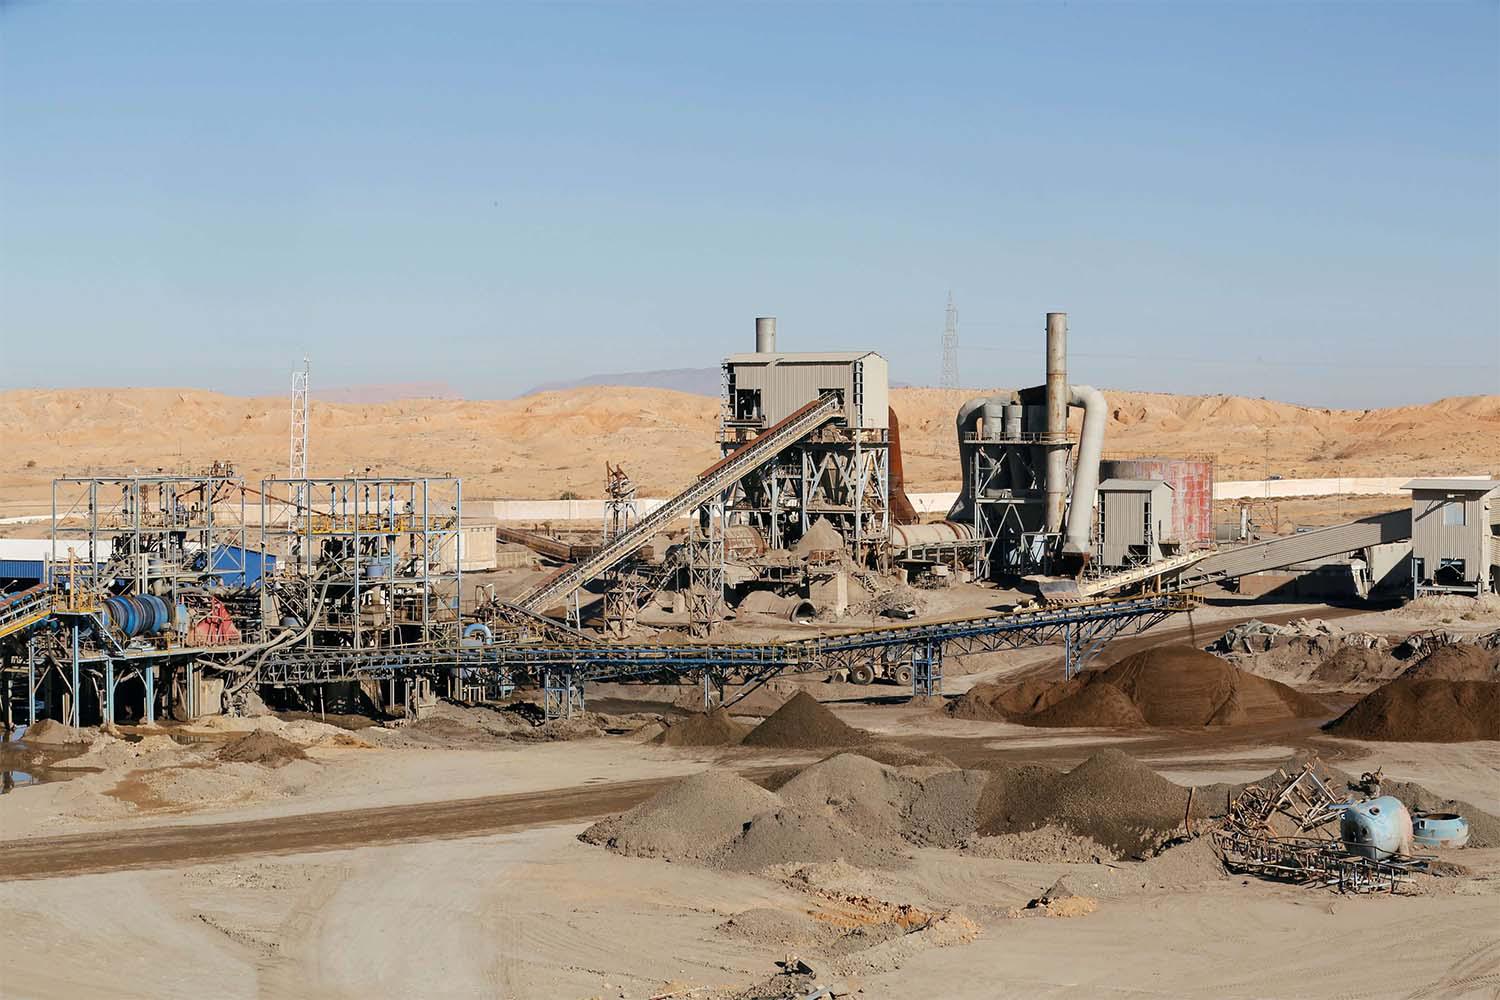 Kais Saied determined to crack down on corruption in the phosphate industry